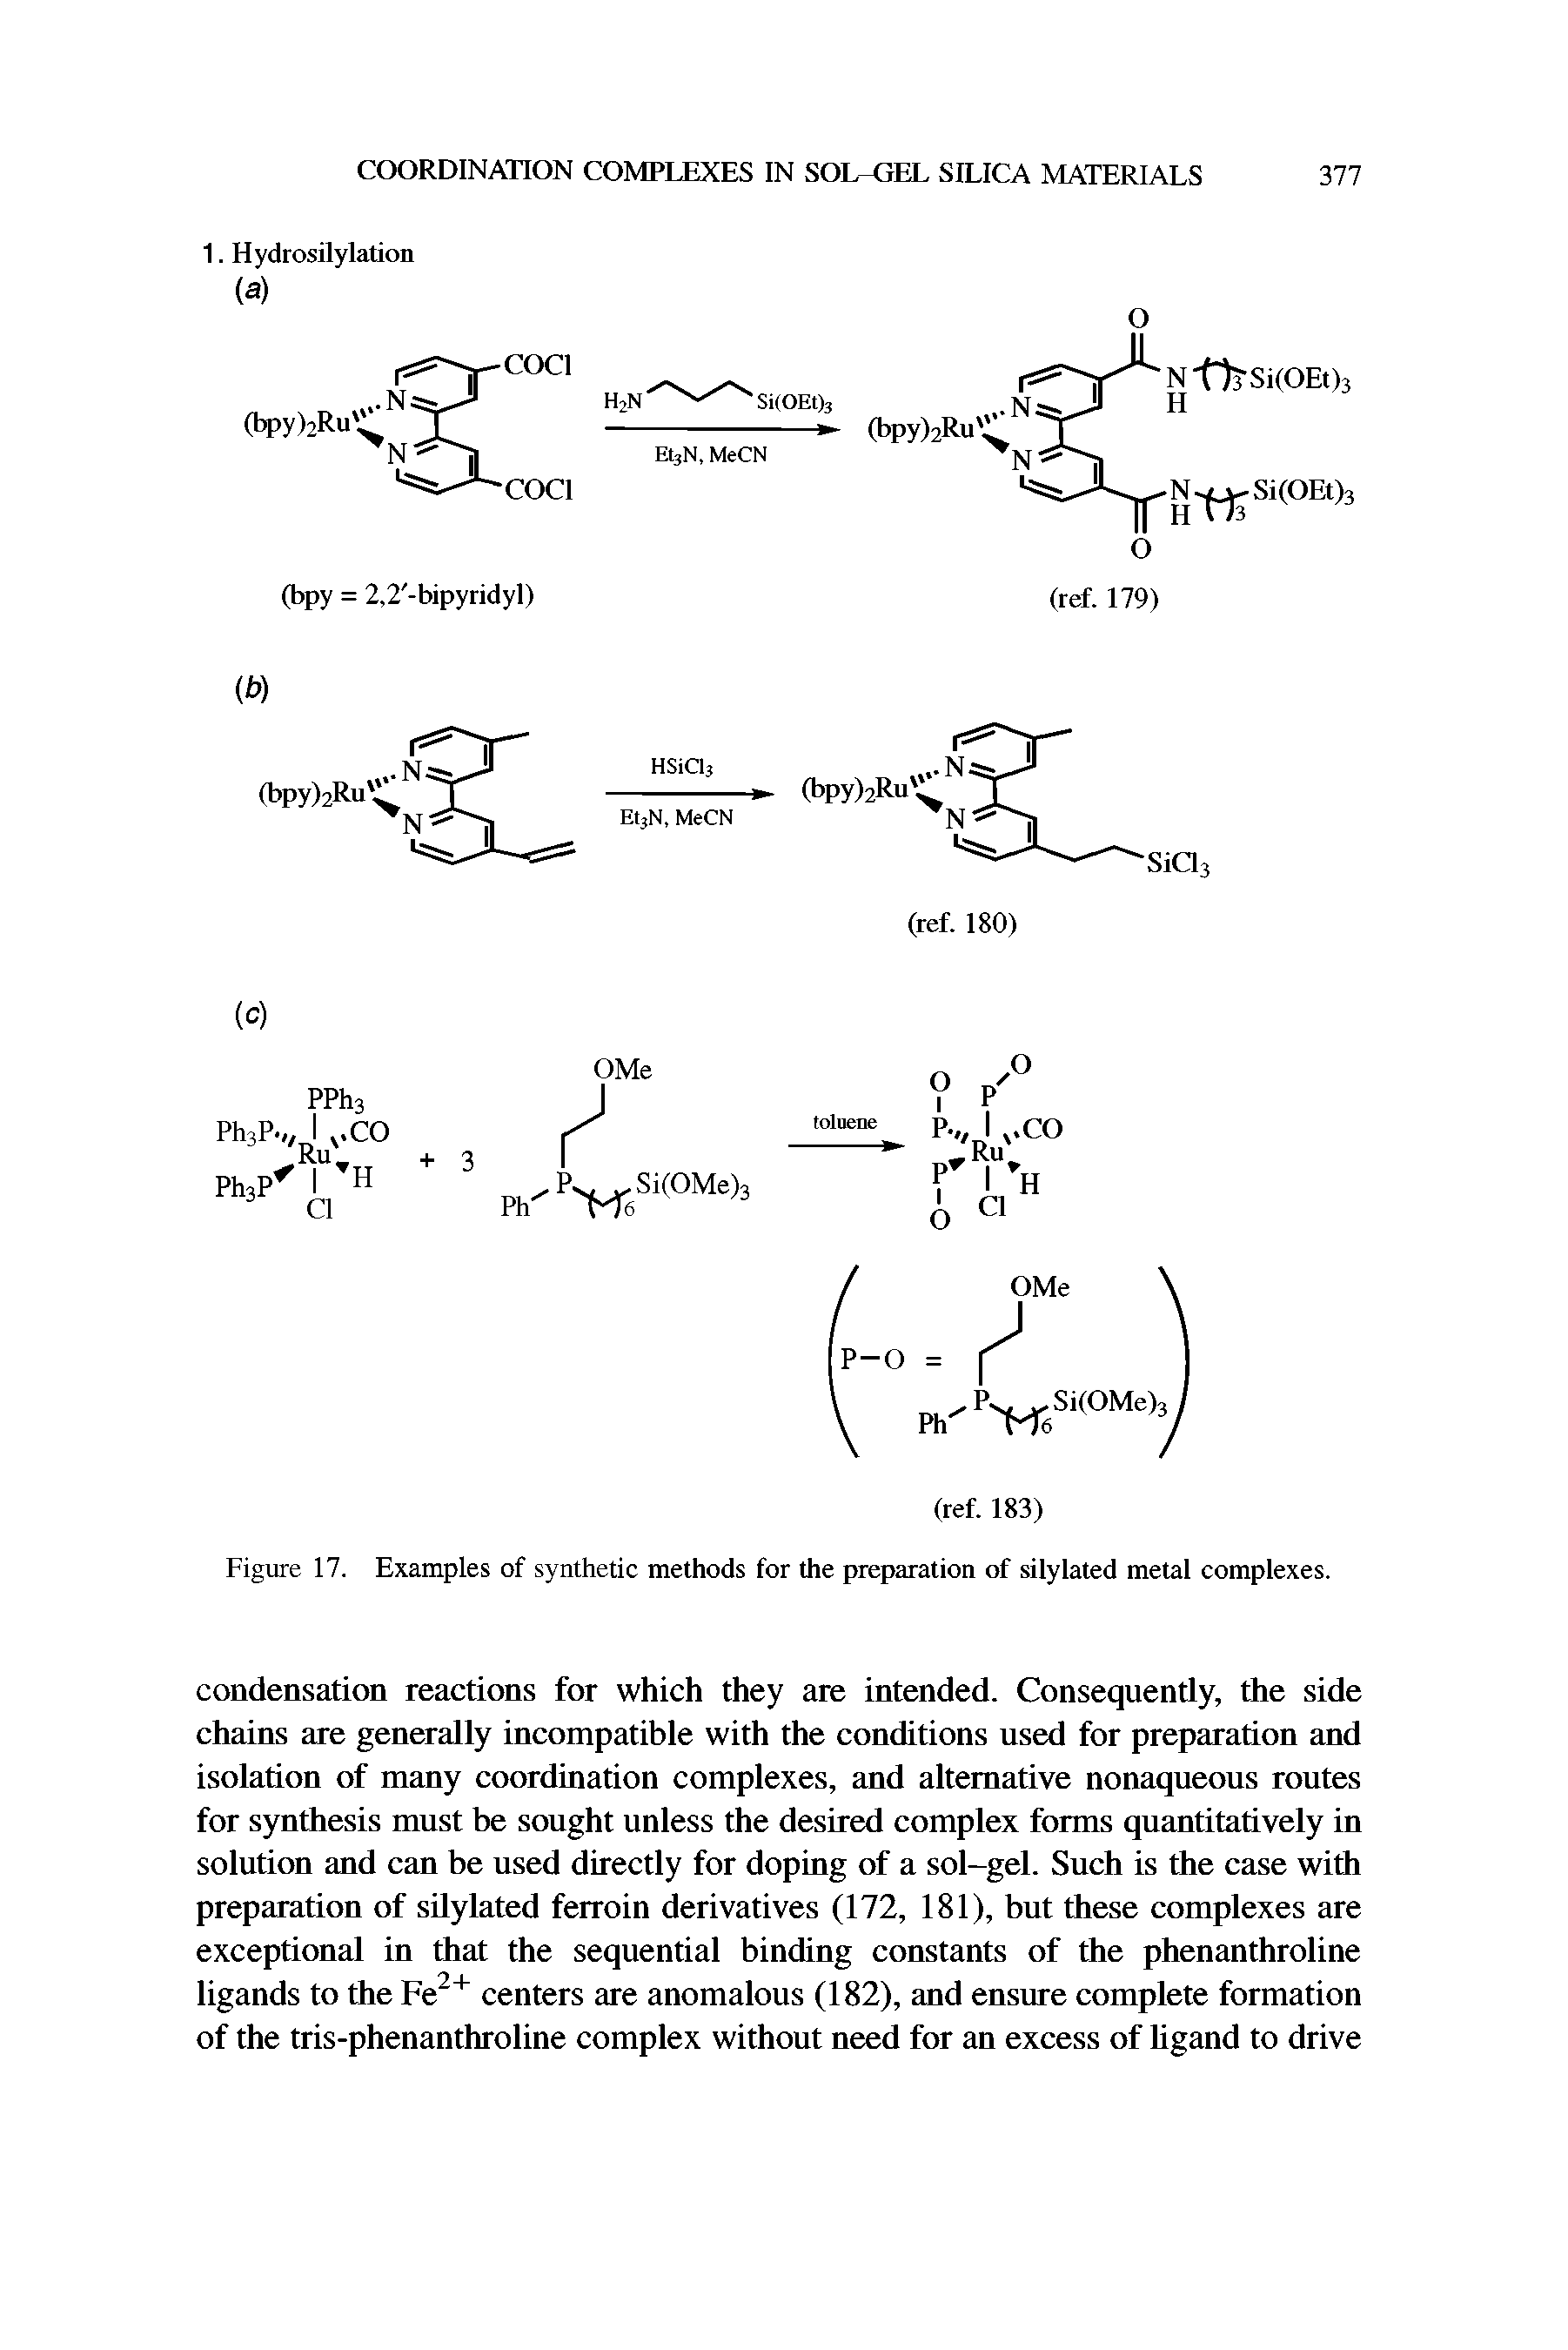 Figure 17. Examples of synthetic methods for the preparation of silylated metal complexes.